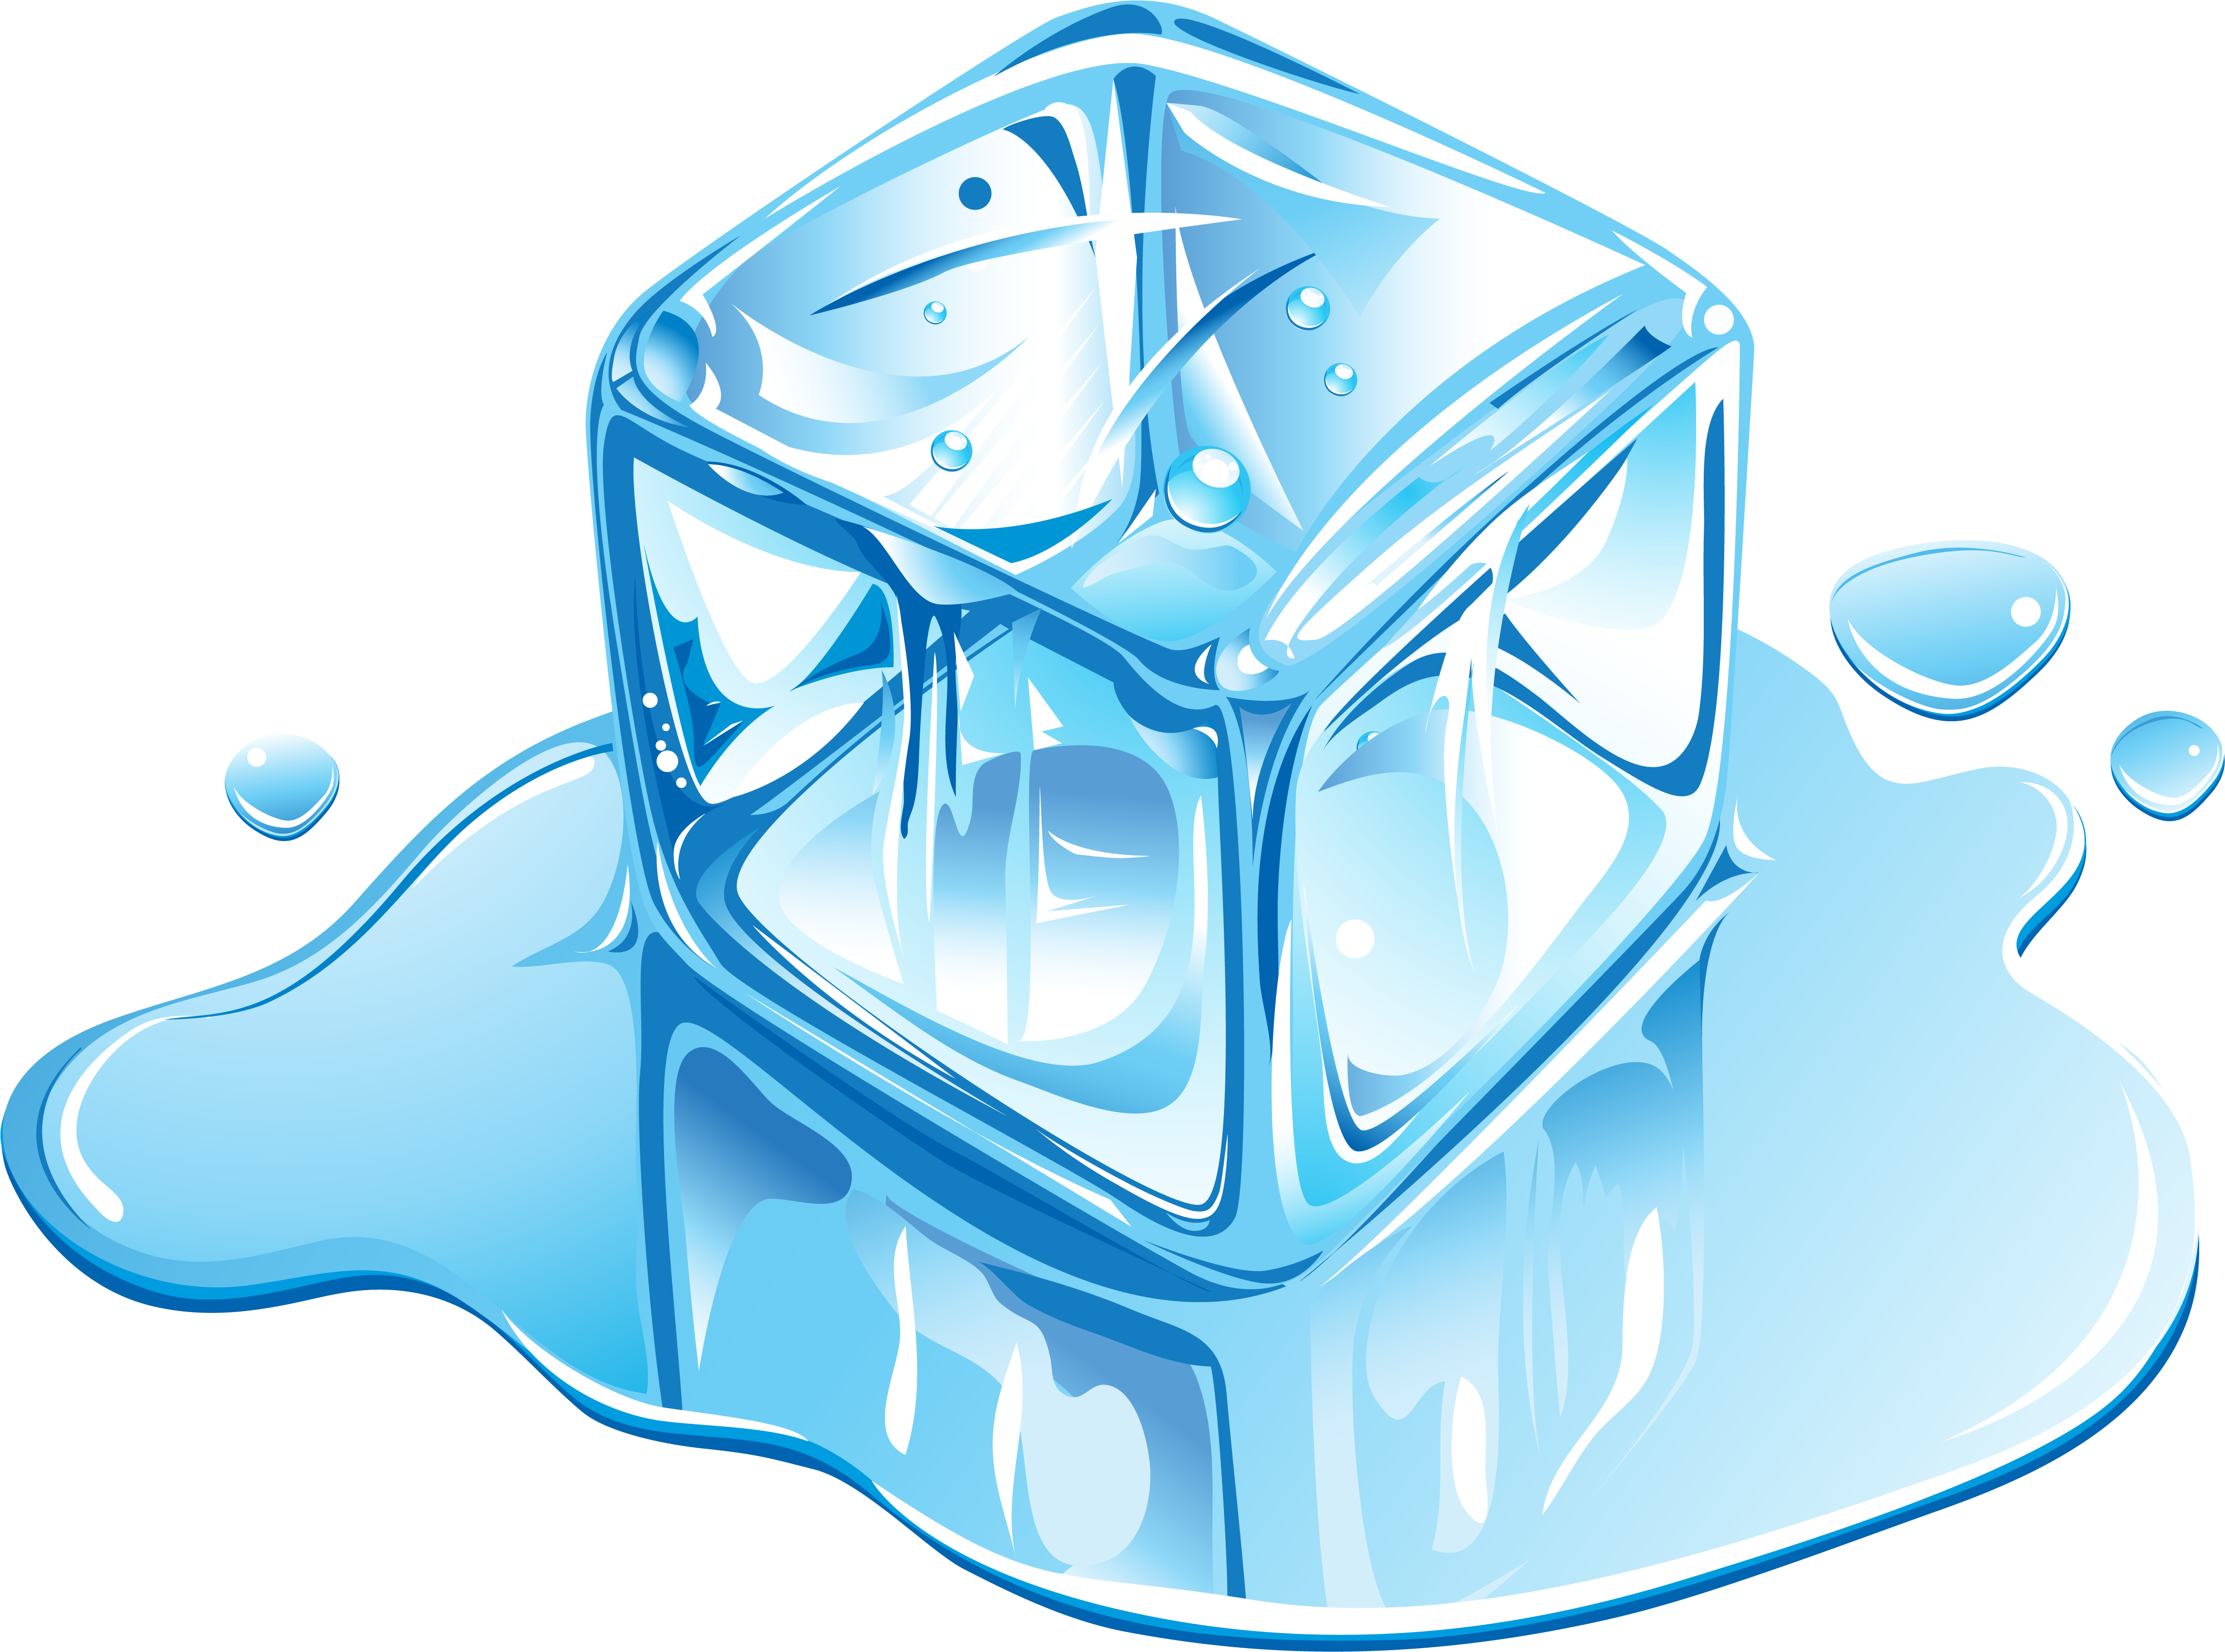 Download and share clipart about Ice Cream Ice Cube Melting - Illustrator I...